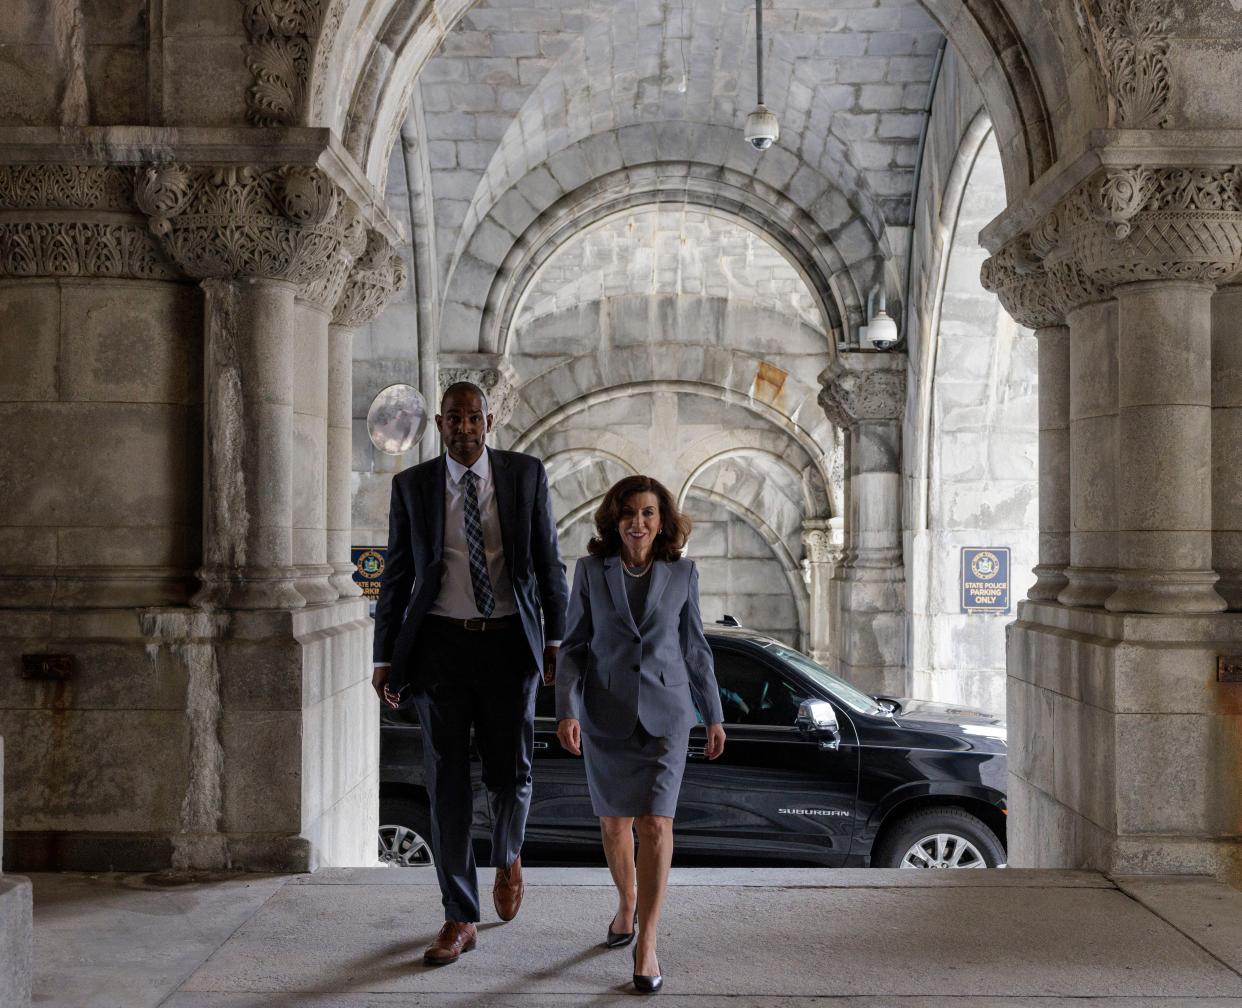 New York Governor Kathy Hochul (right) announces her appointment of Congressman Antonio Delgado (D-N.Y.) as Lieutenant Governor during a news conference at the State Capitol in Albany on May 3, 2022.